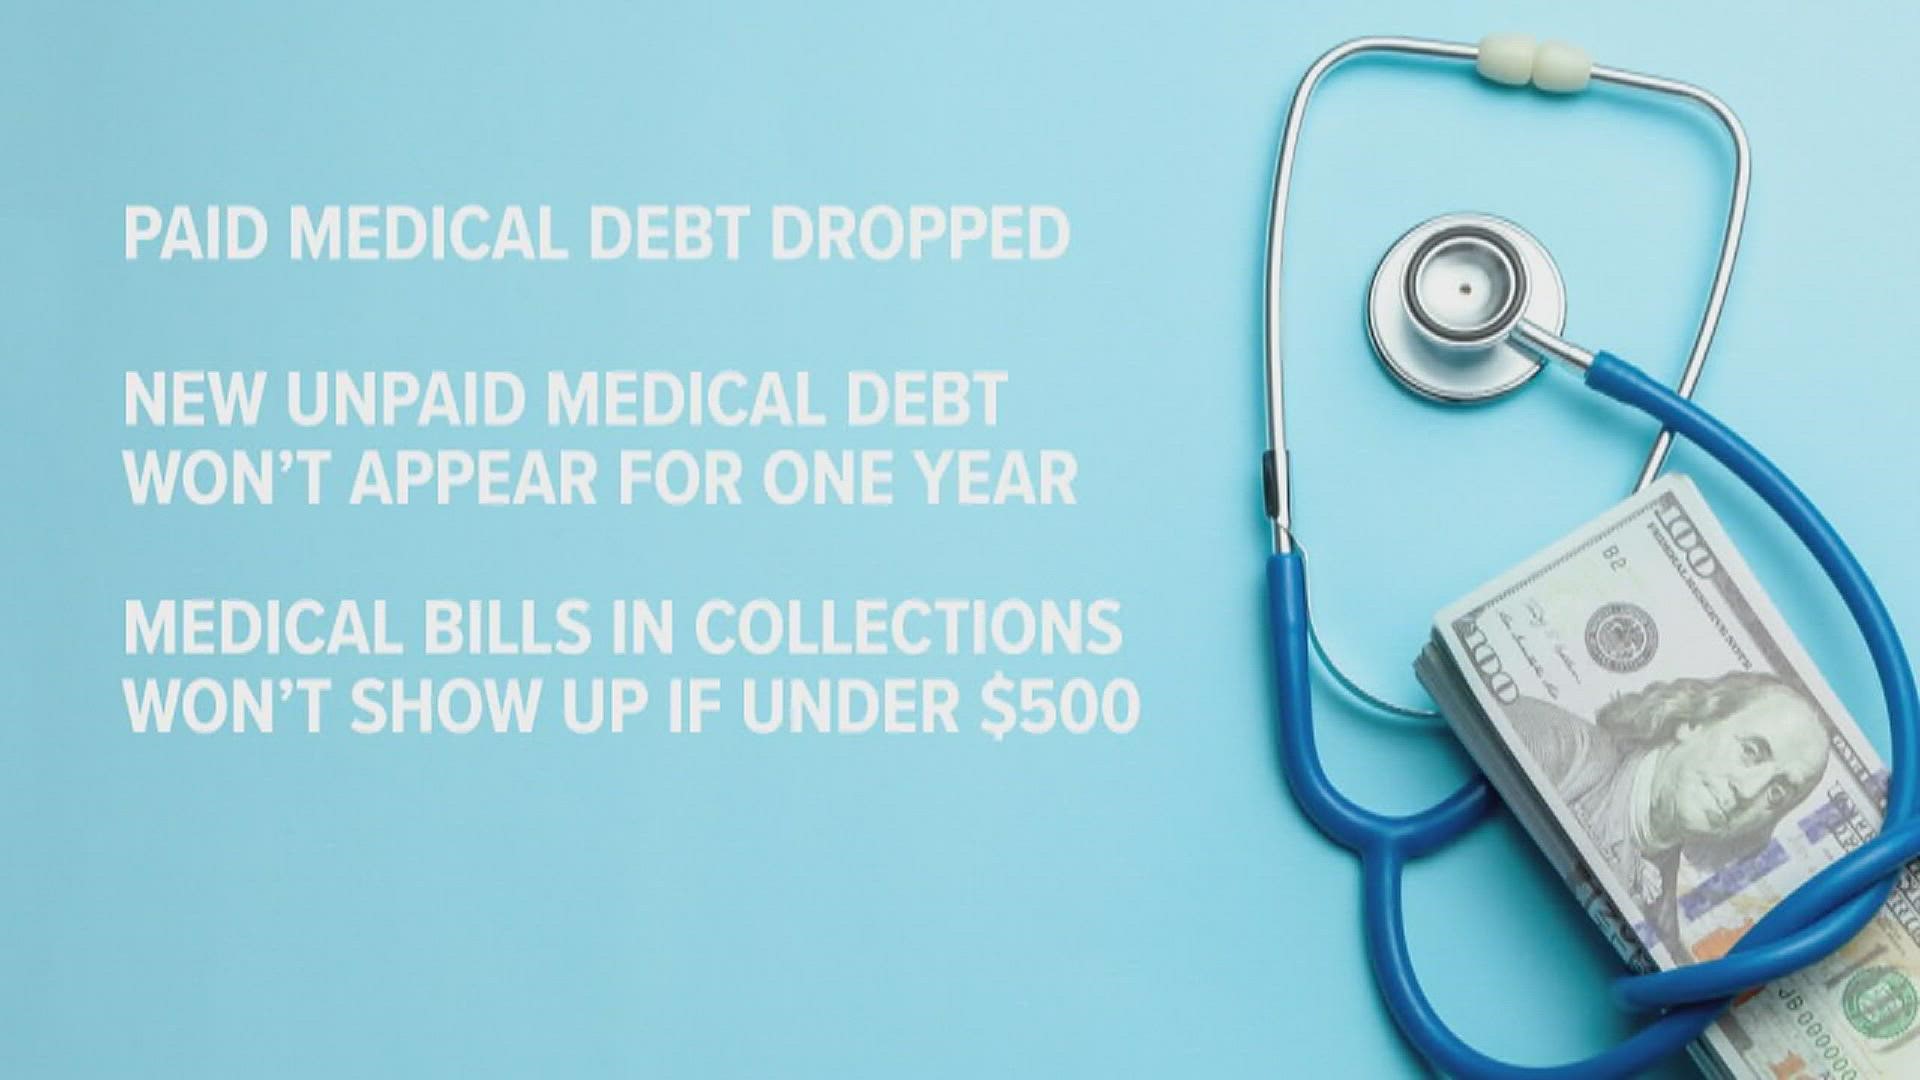 Medical bills are the leading cause of bankruptcy in America.